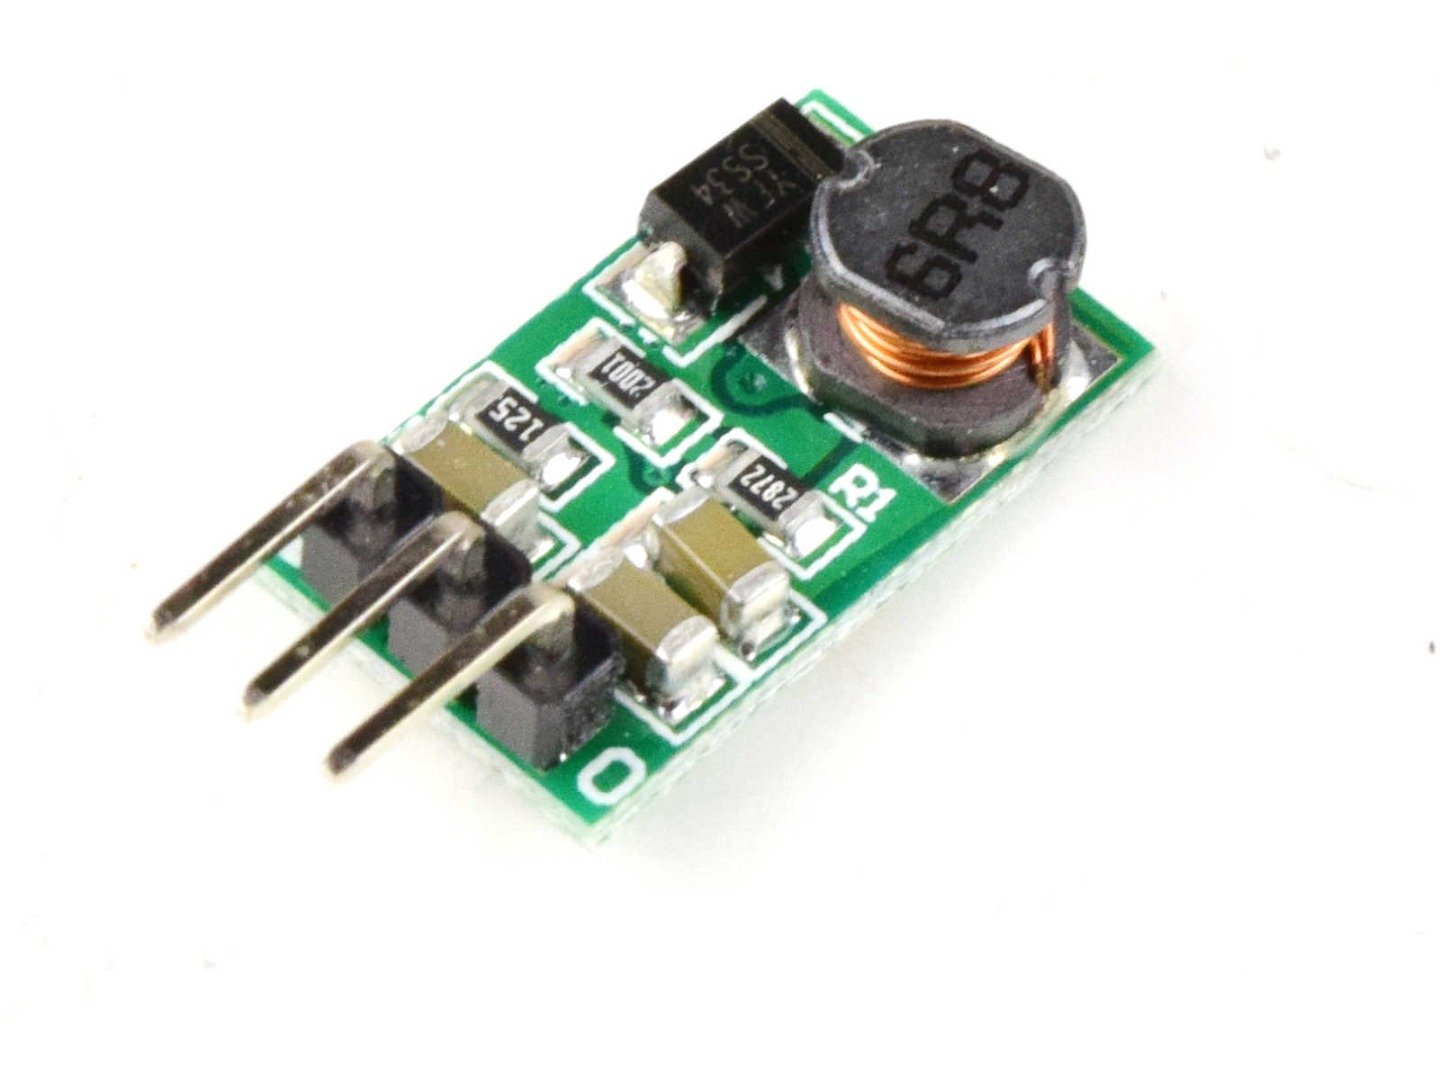 DC-DC Switching Regulator 12V 0.5A – TO-220 pinout – 7812 Replacement 7